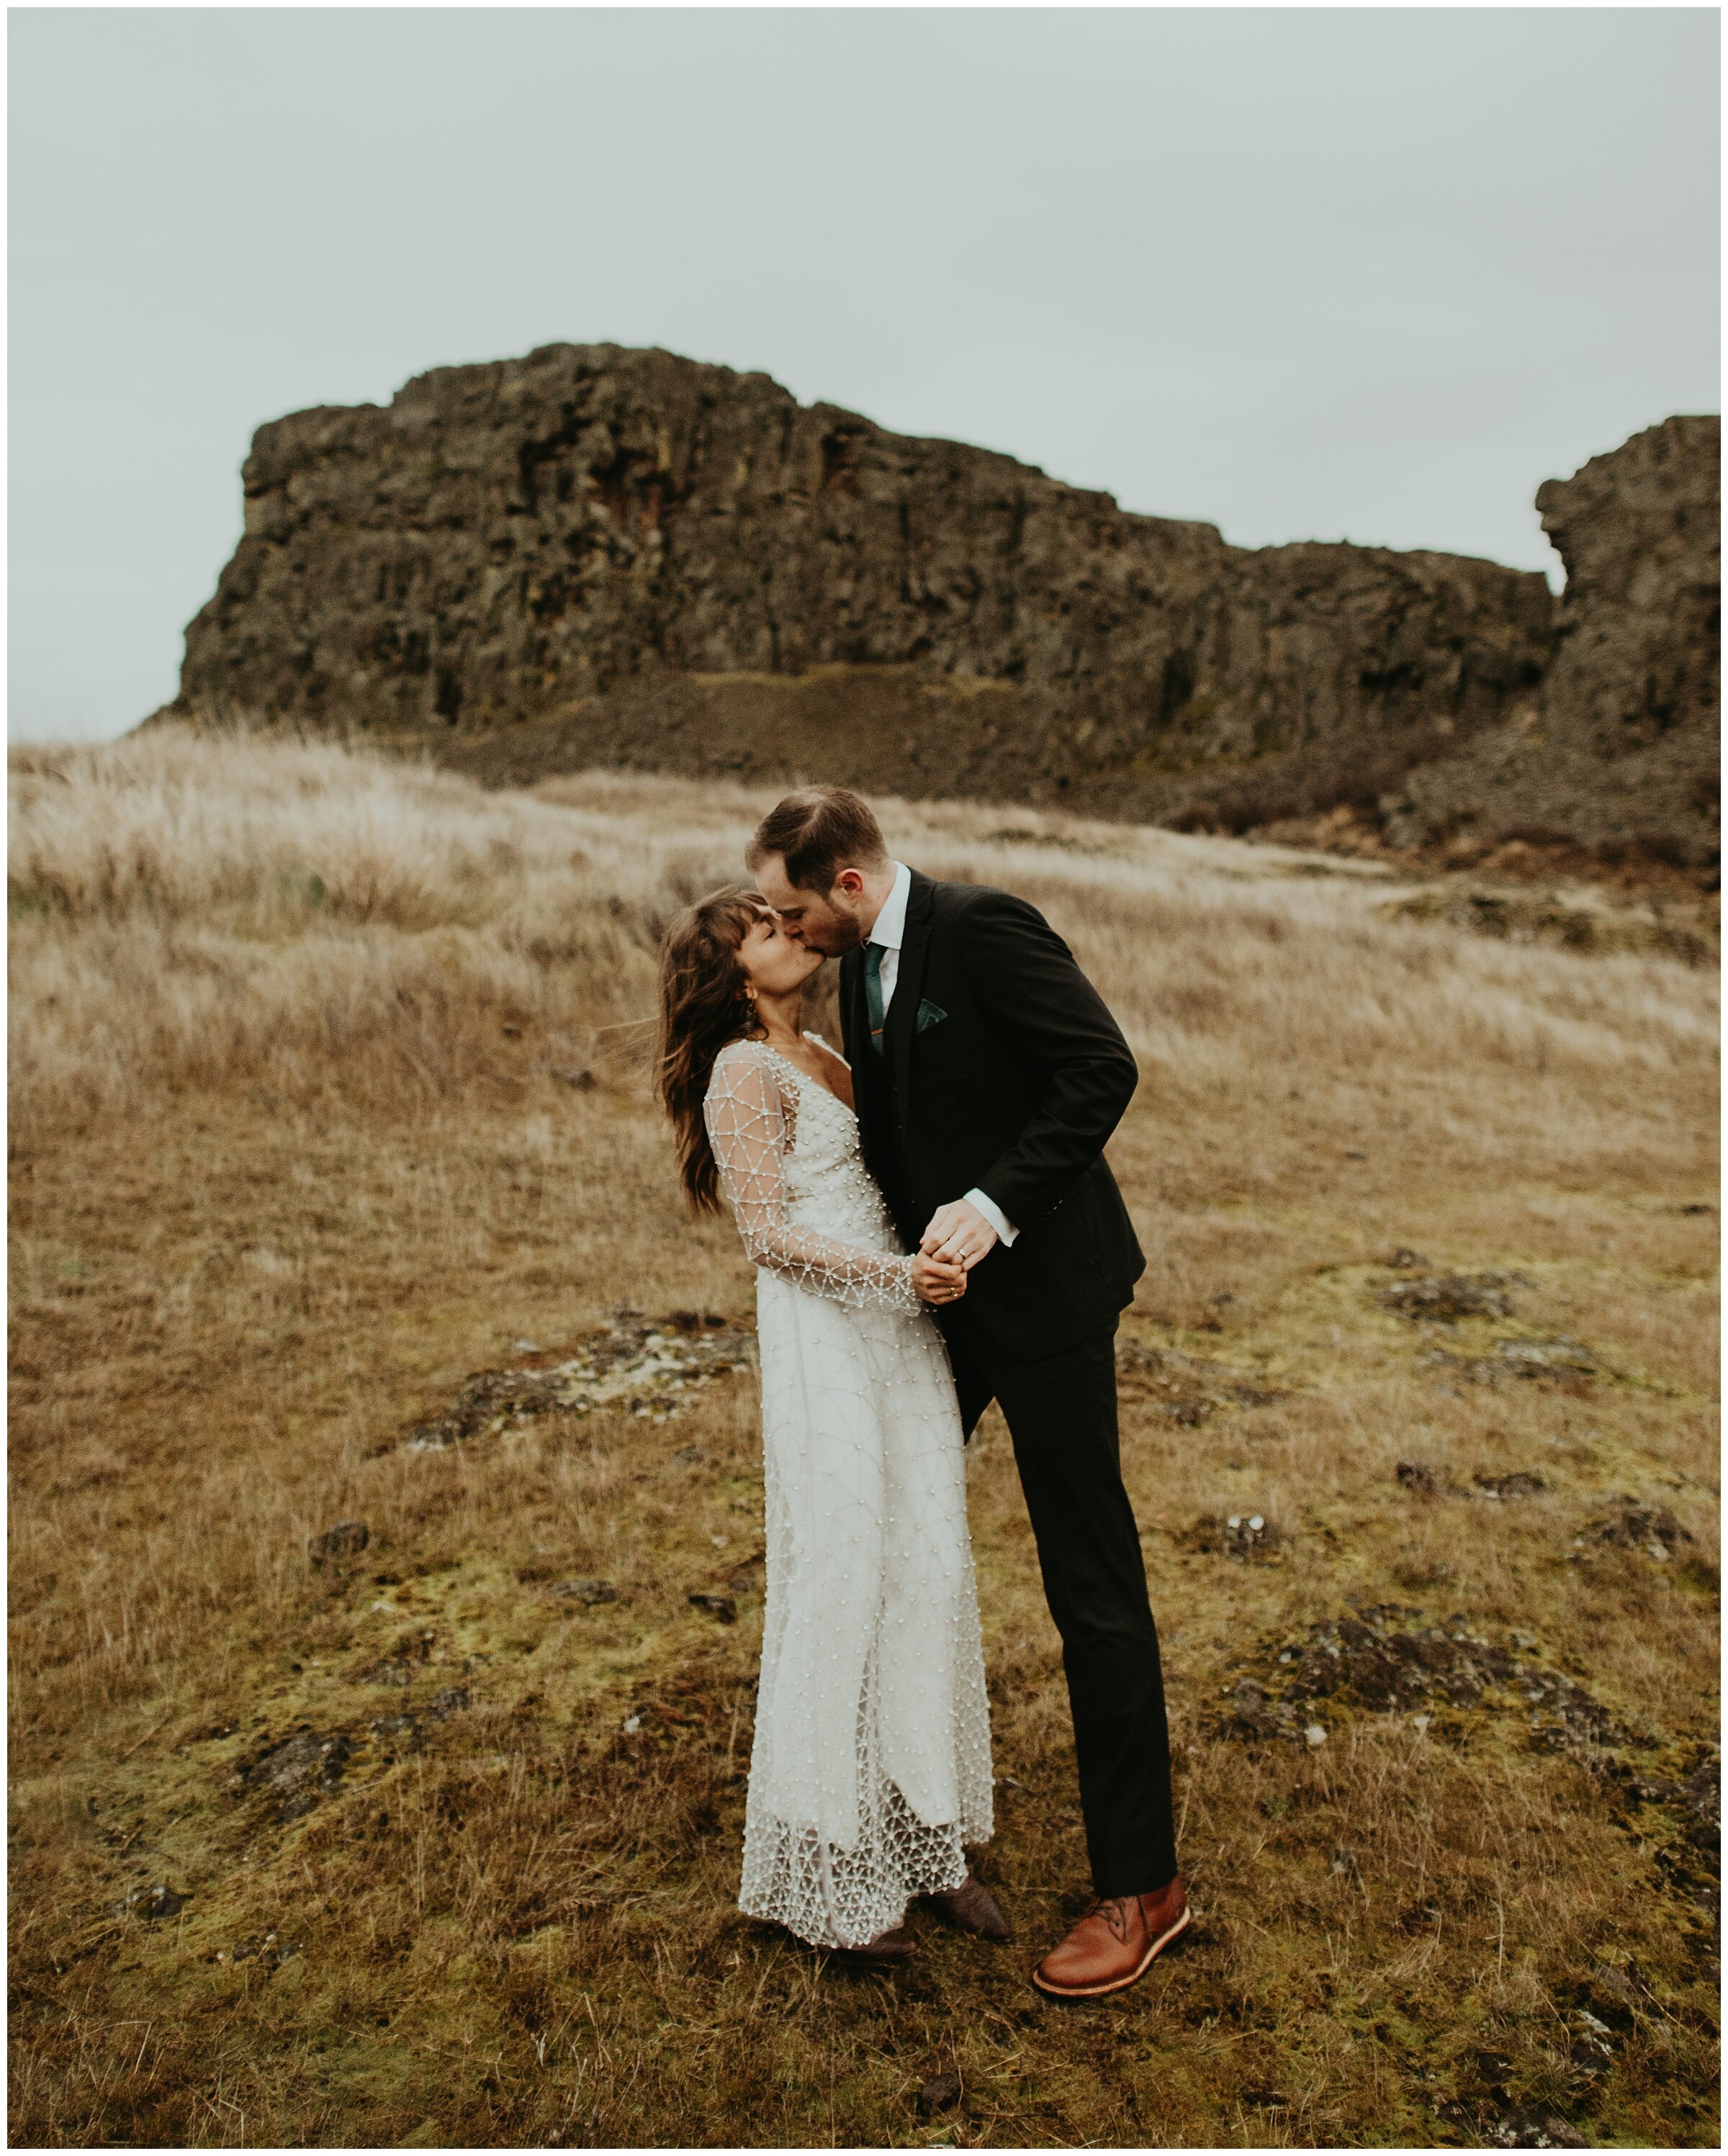 Shane + Cate's Wedding Portrait Session at Horse Thief Butte, Columbia River Gorge by PNW Elopement Photographer, Kamra Fuller Photography